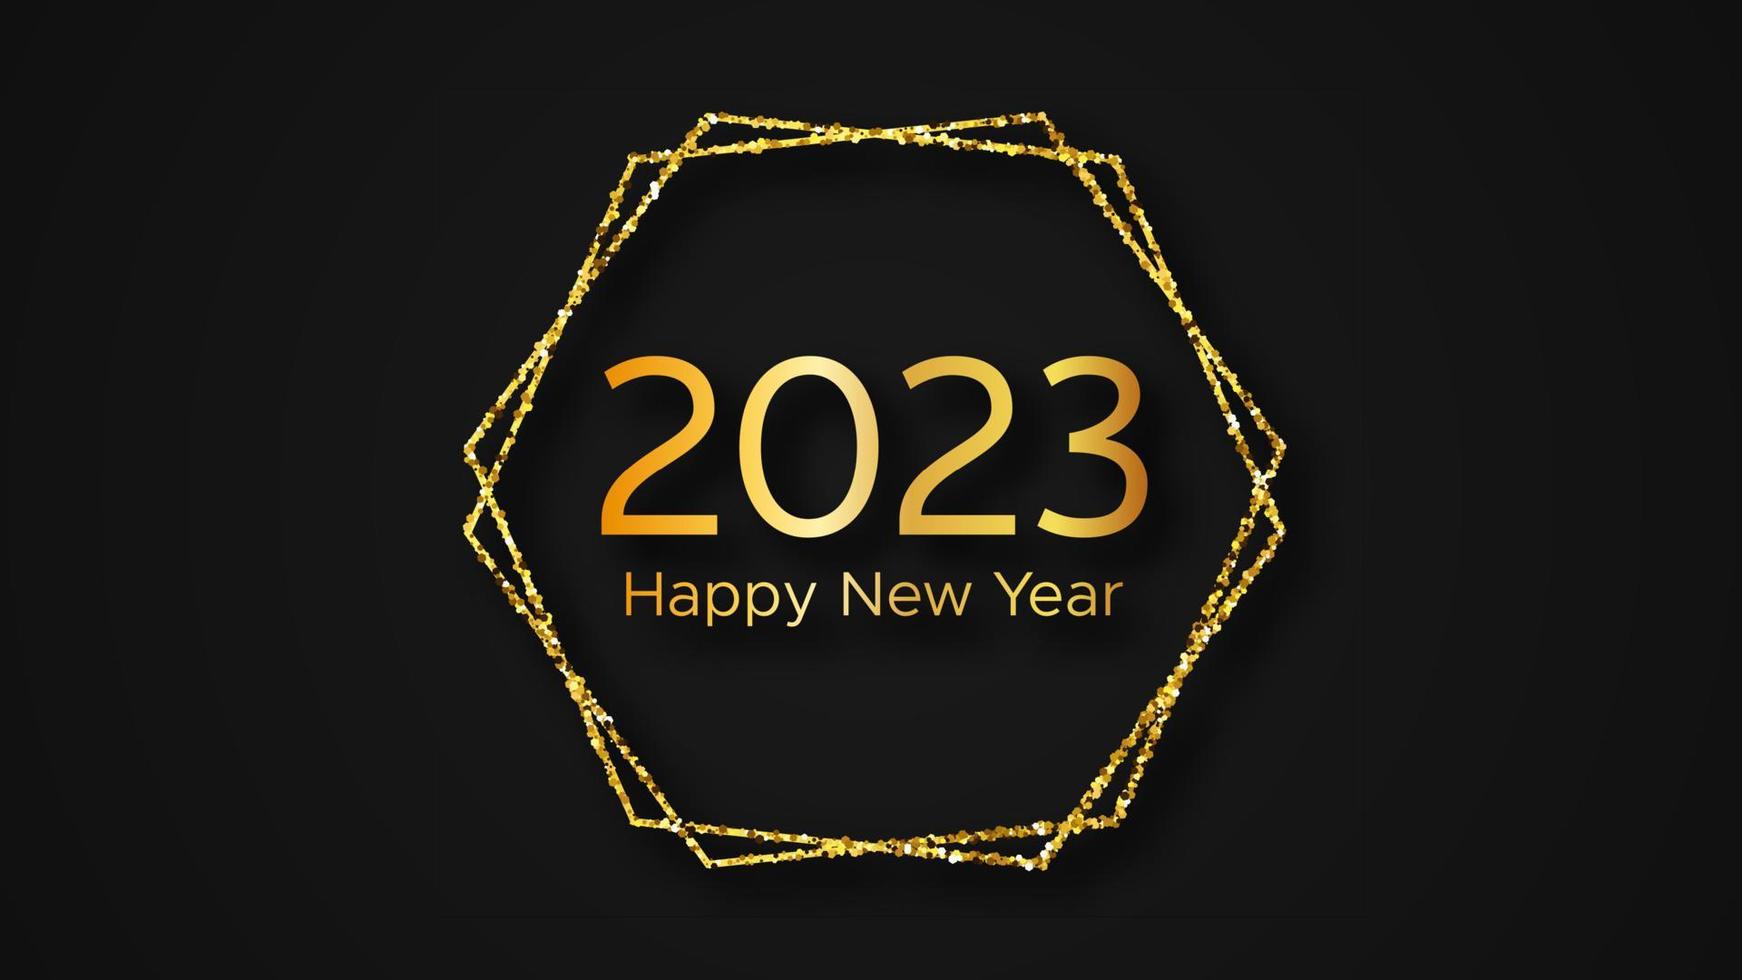 2023 Happy New Year gold background vector